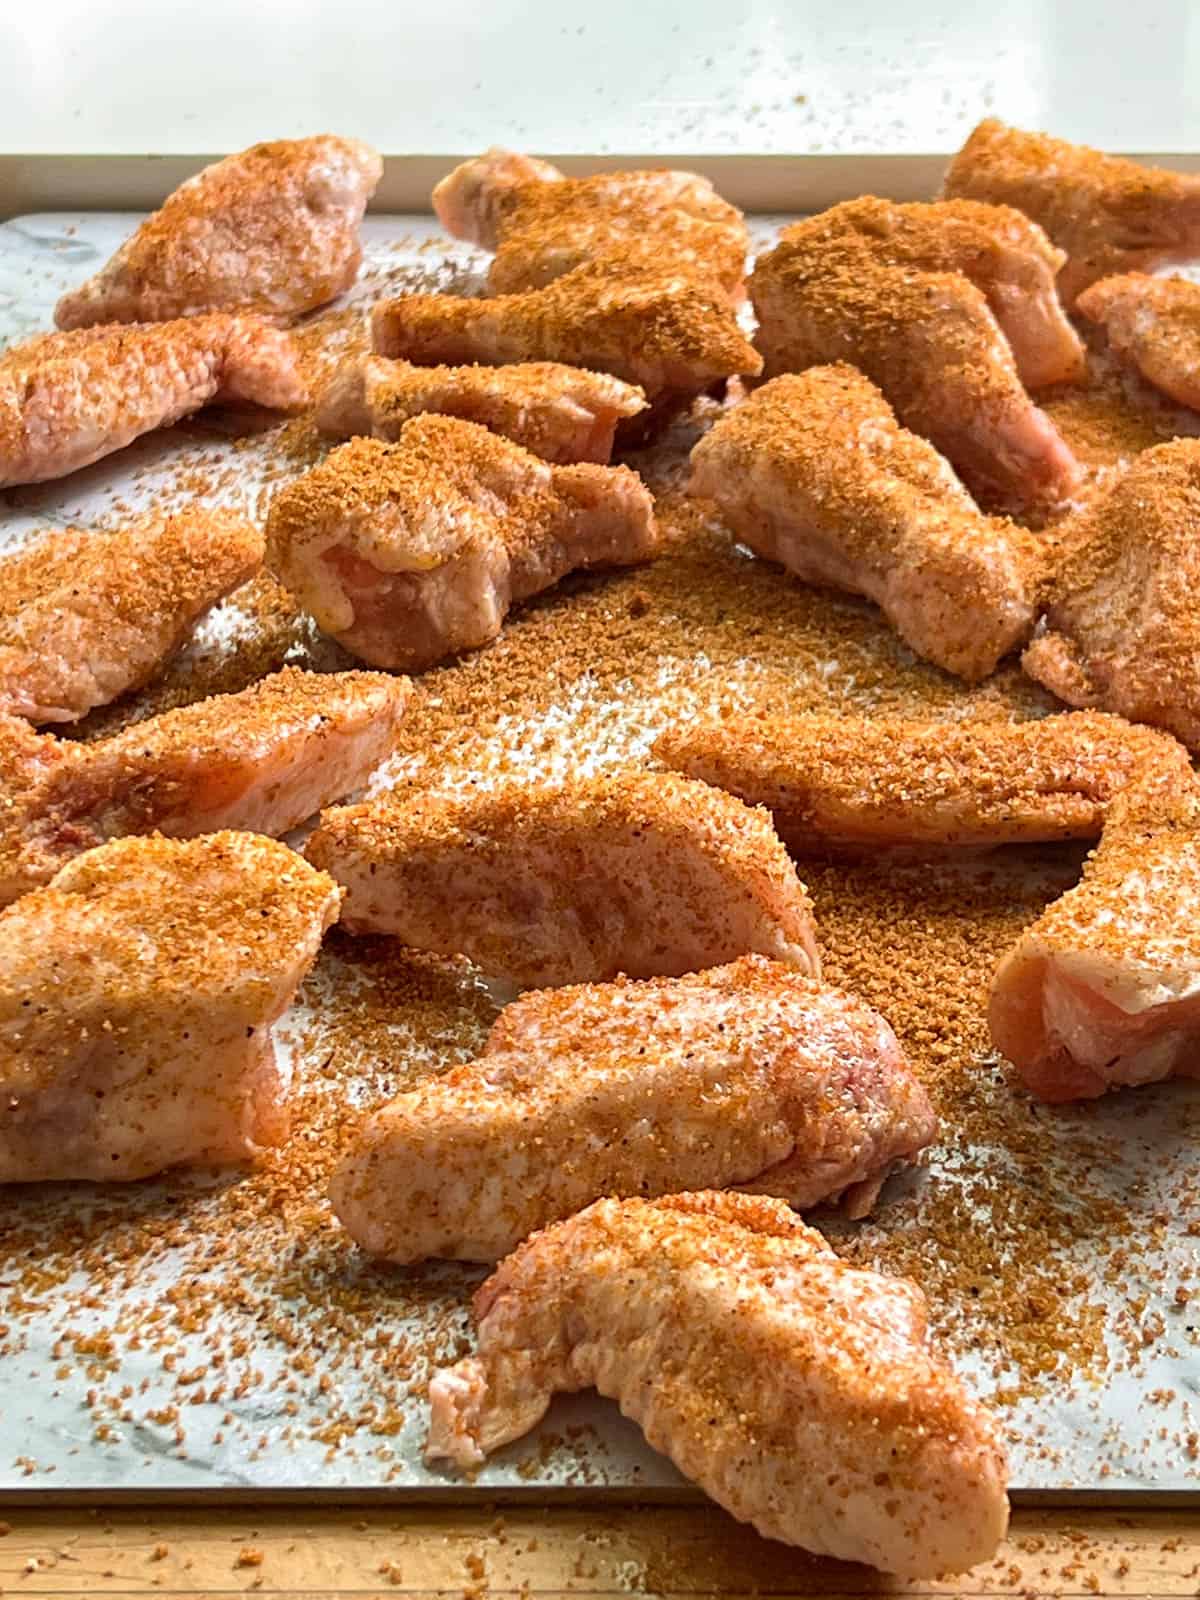 Raw chicken wings covered in dry rub.